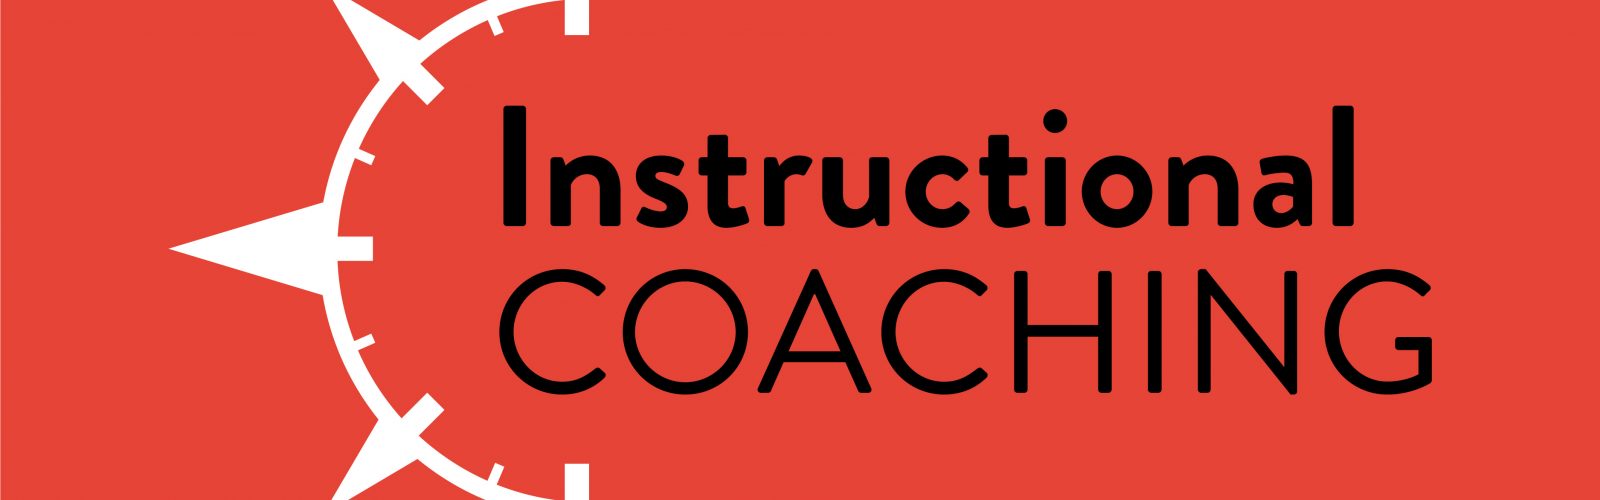 Red graphic with a white compass. The text reads, "Instructional Coaching".